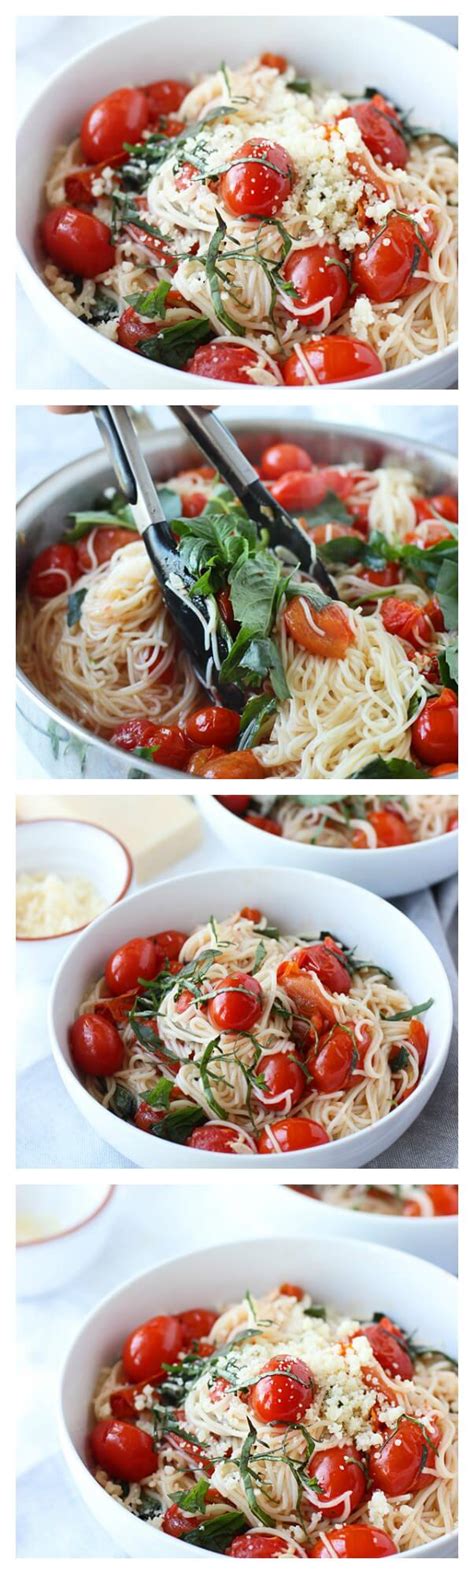 Capellini's diameter measures between 0.85 and 0.92 millimeters, while. 20 Minute Cherry Tomato and Basil Angel Hair Pasta - Oh ...